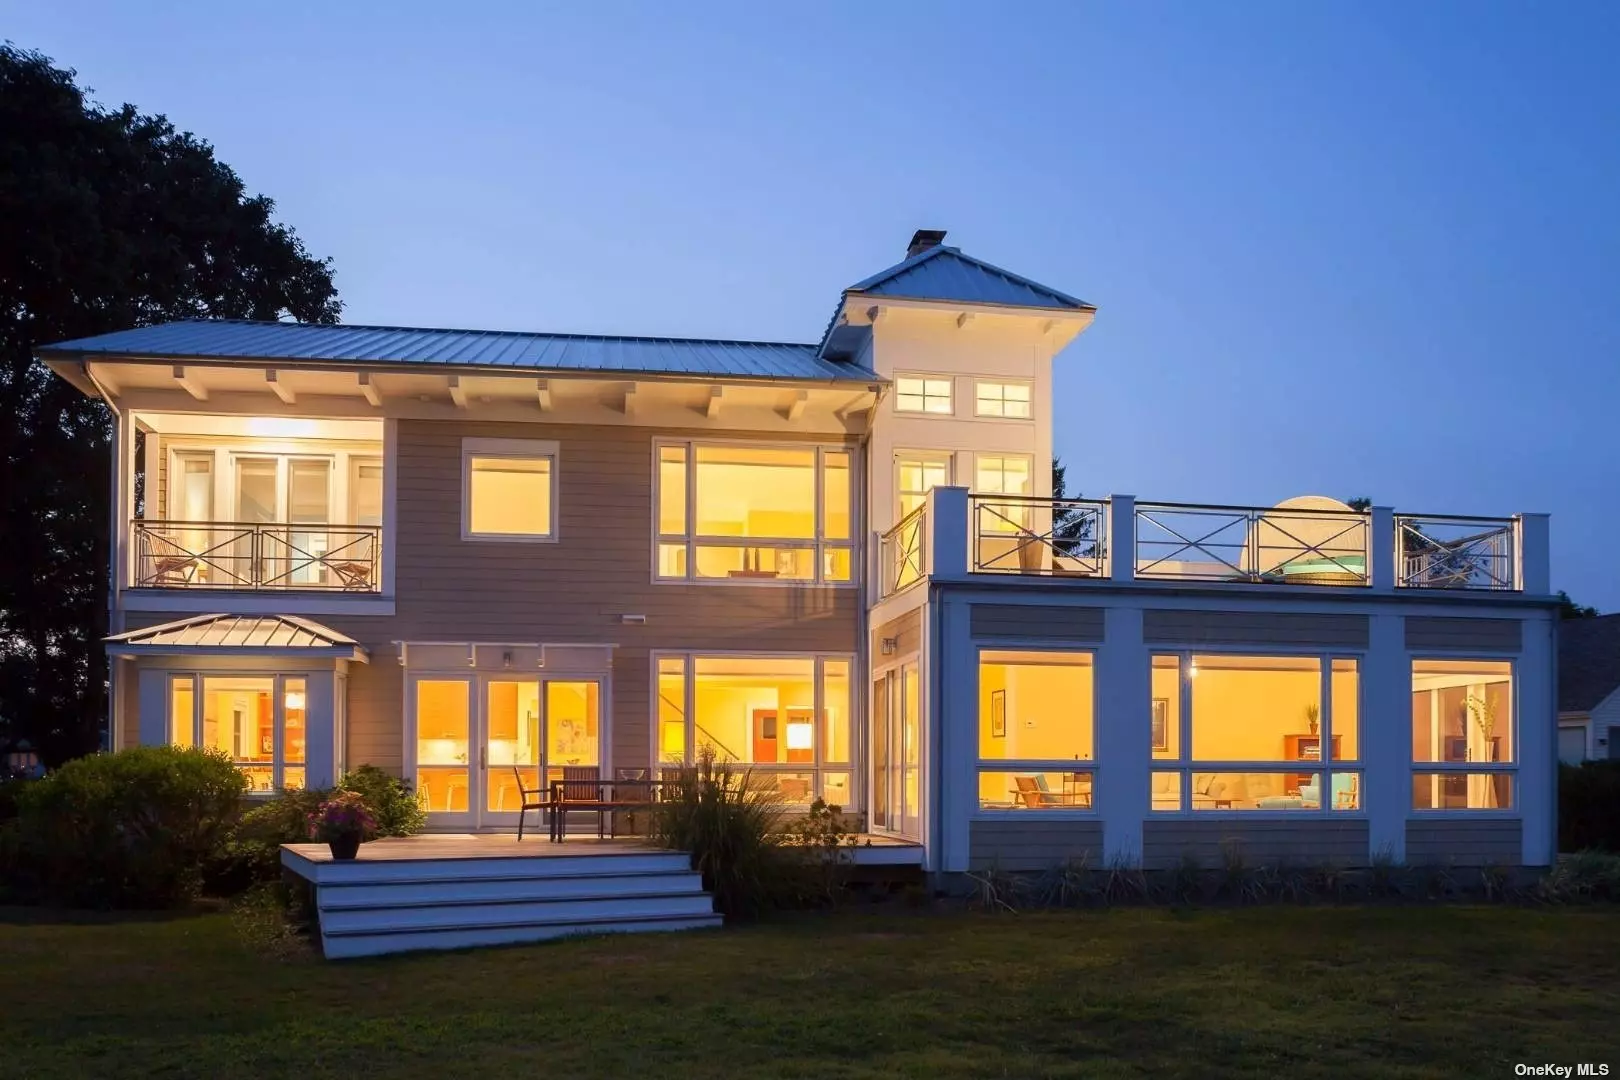 Beachfront, located in Southold Shores, this architect&rsquo;s own home is built with all the beautiful appointments you can imagine. Embracing the purity of architectural detail, together with a refined simplicity, this waterfront home offers a timeless elegance. Sweeping sunsets eye-catching angles and thoughtful details provide constant visual interest. A large 4 bedrooms with 4 baths ensuite, seaside floor to ceiling windows overlooking the Bayfront, Chefs kitchen leading to large outdoor deck and lovely garden. It is truly stunning. A special summer oasis. Available June $24K, August $45K, Sept $25K RP# 0857